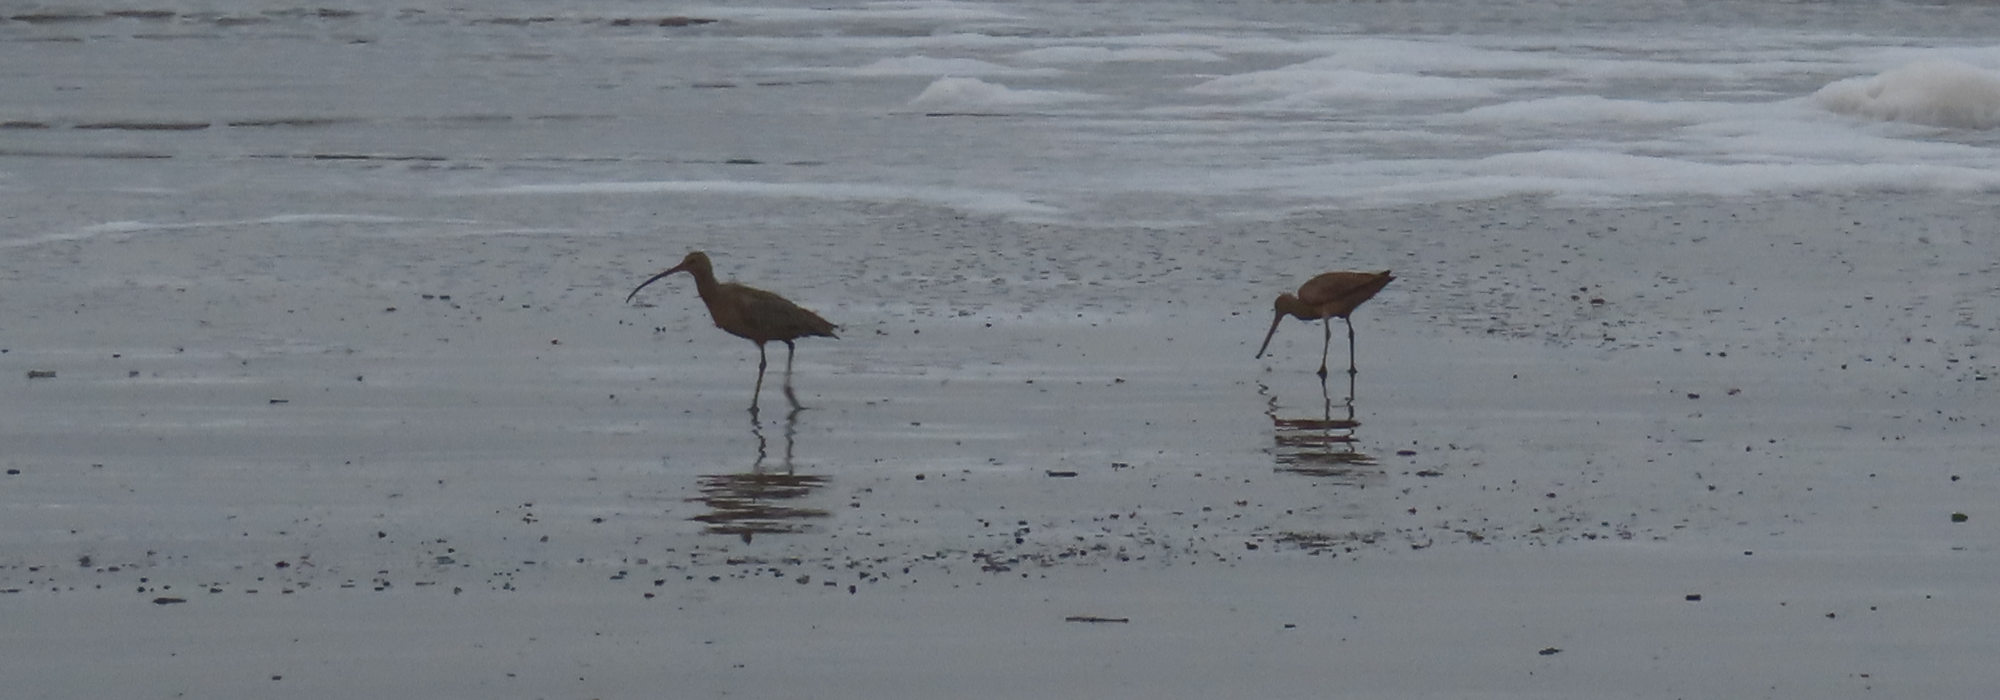 Two wading birds in silhouette on the beach. The one on the left has a down-curling bill and is probably a Whimbrel but might be a Long-billed Curlew.